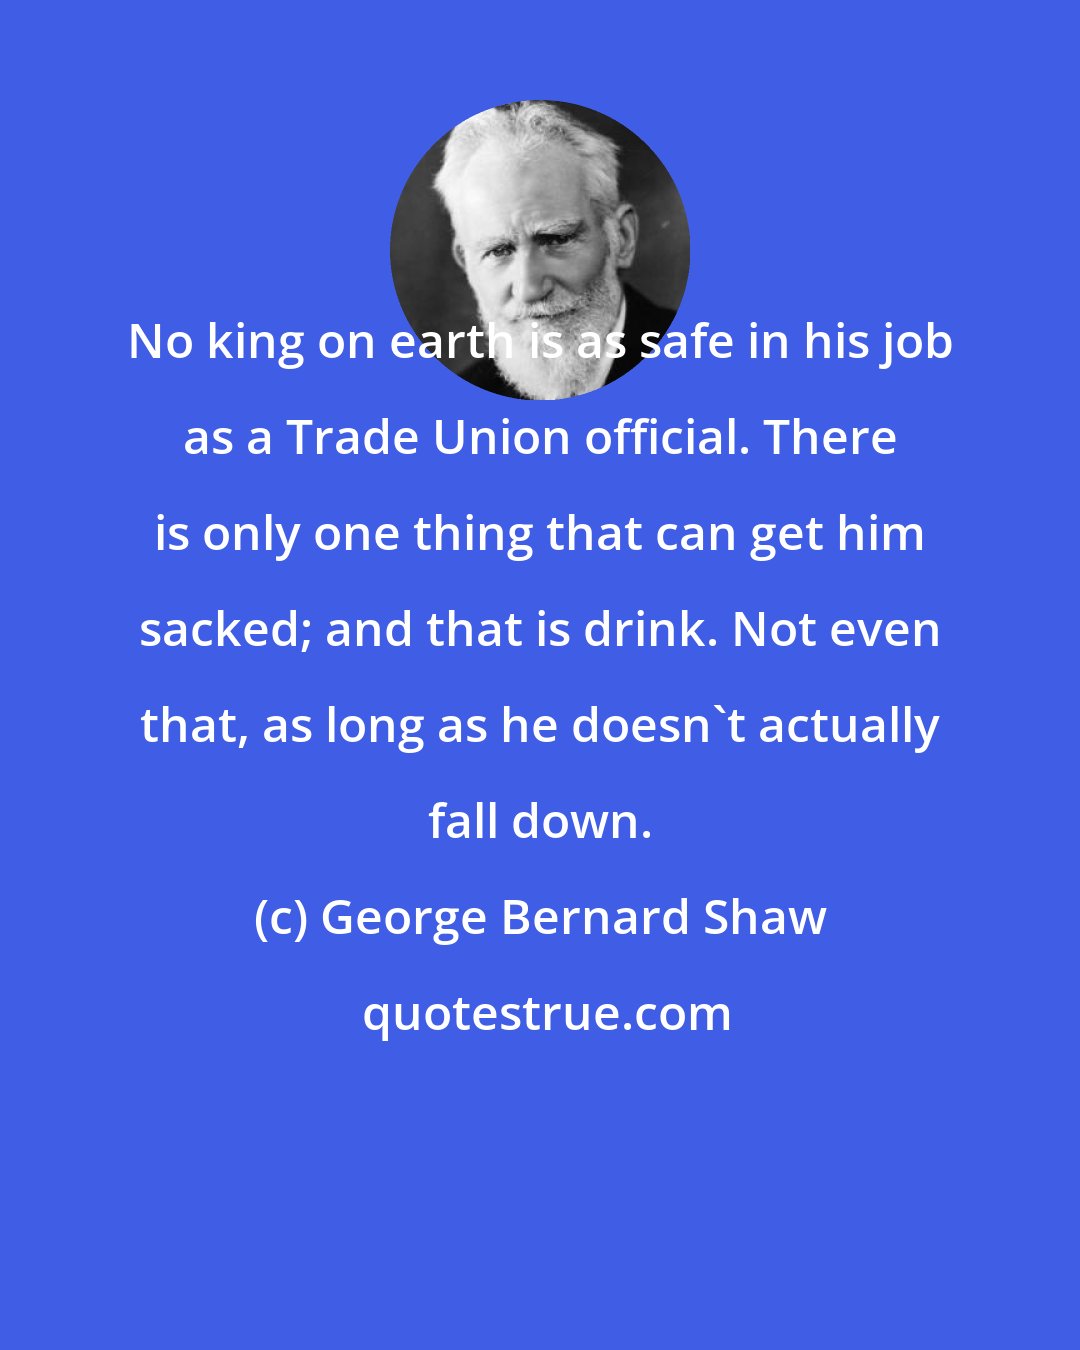 George Bernard Shaw: No king on earth is as safe in his job as a Trade Union official. There is only one thing that can get him sacked; and that is drink. Not even that, as long as he doesn't actually fall down.